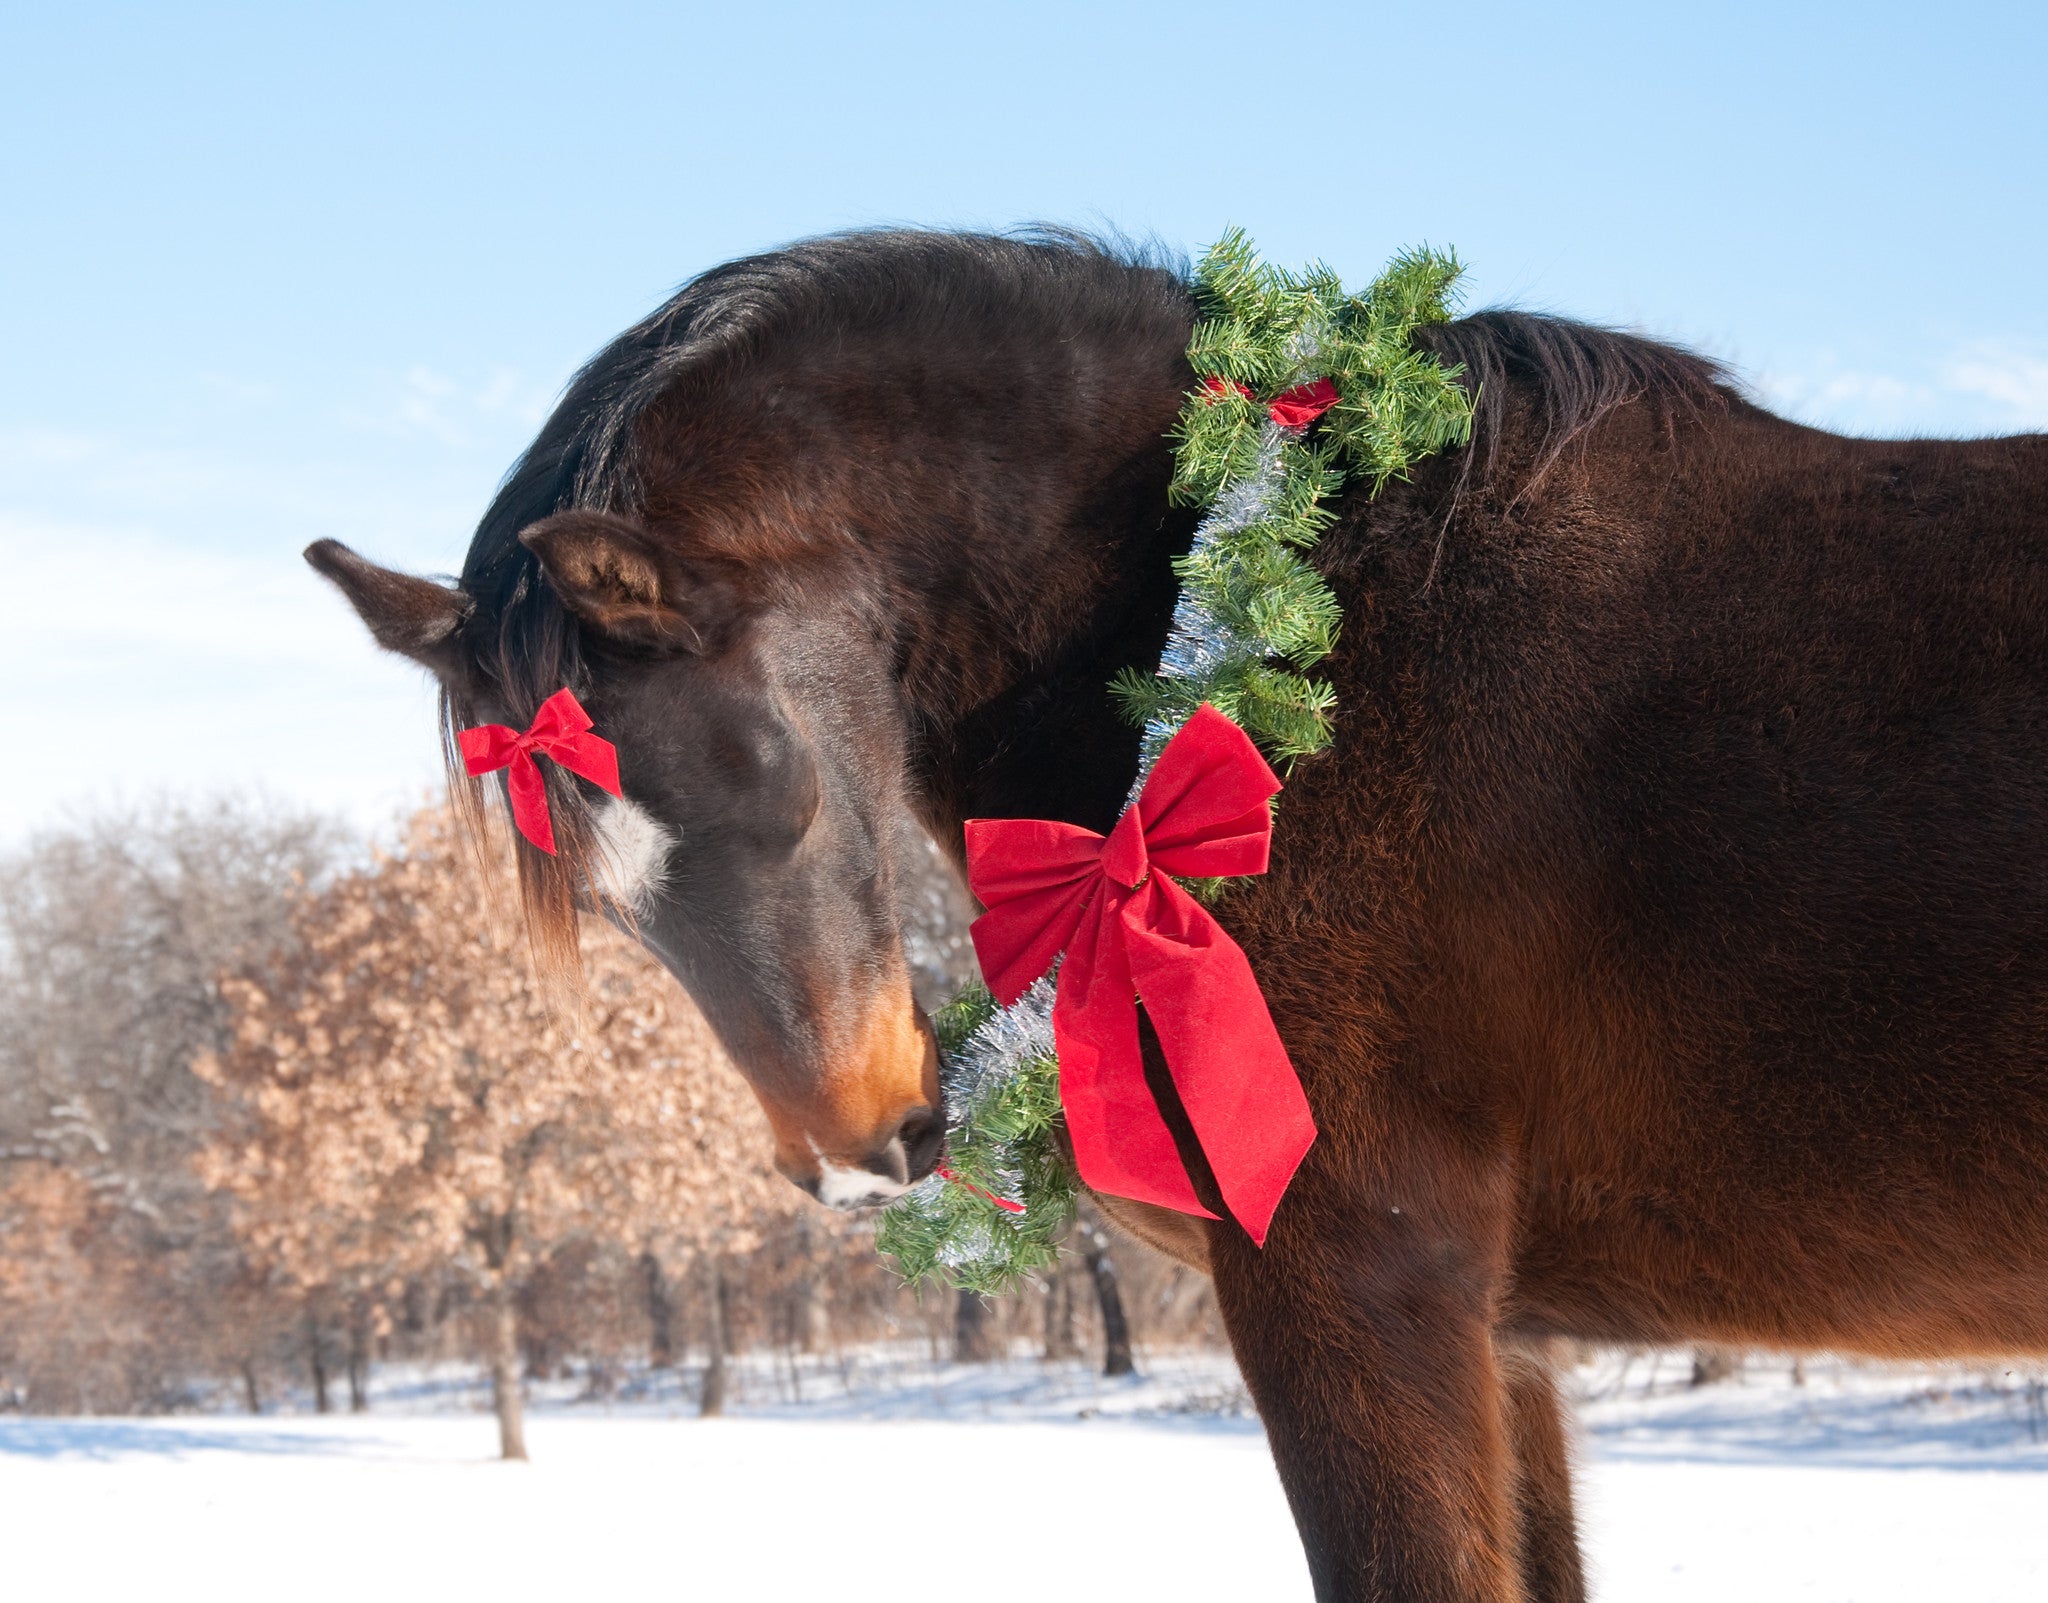 Safe Holiday Barn Decorating – Plants that are Poisonous to Horses